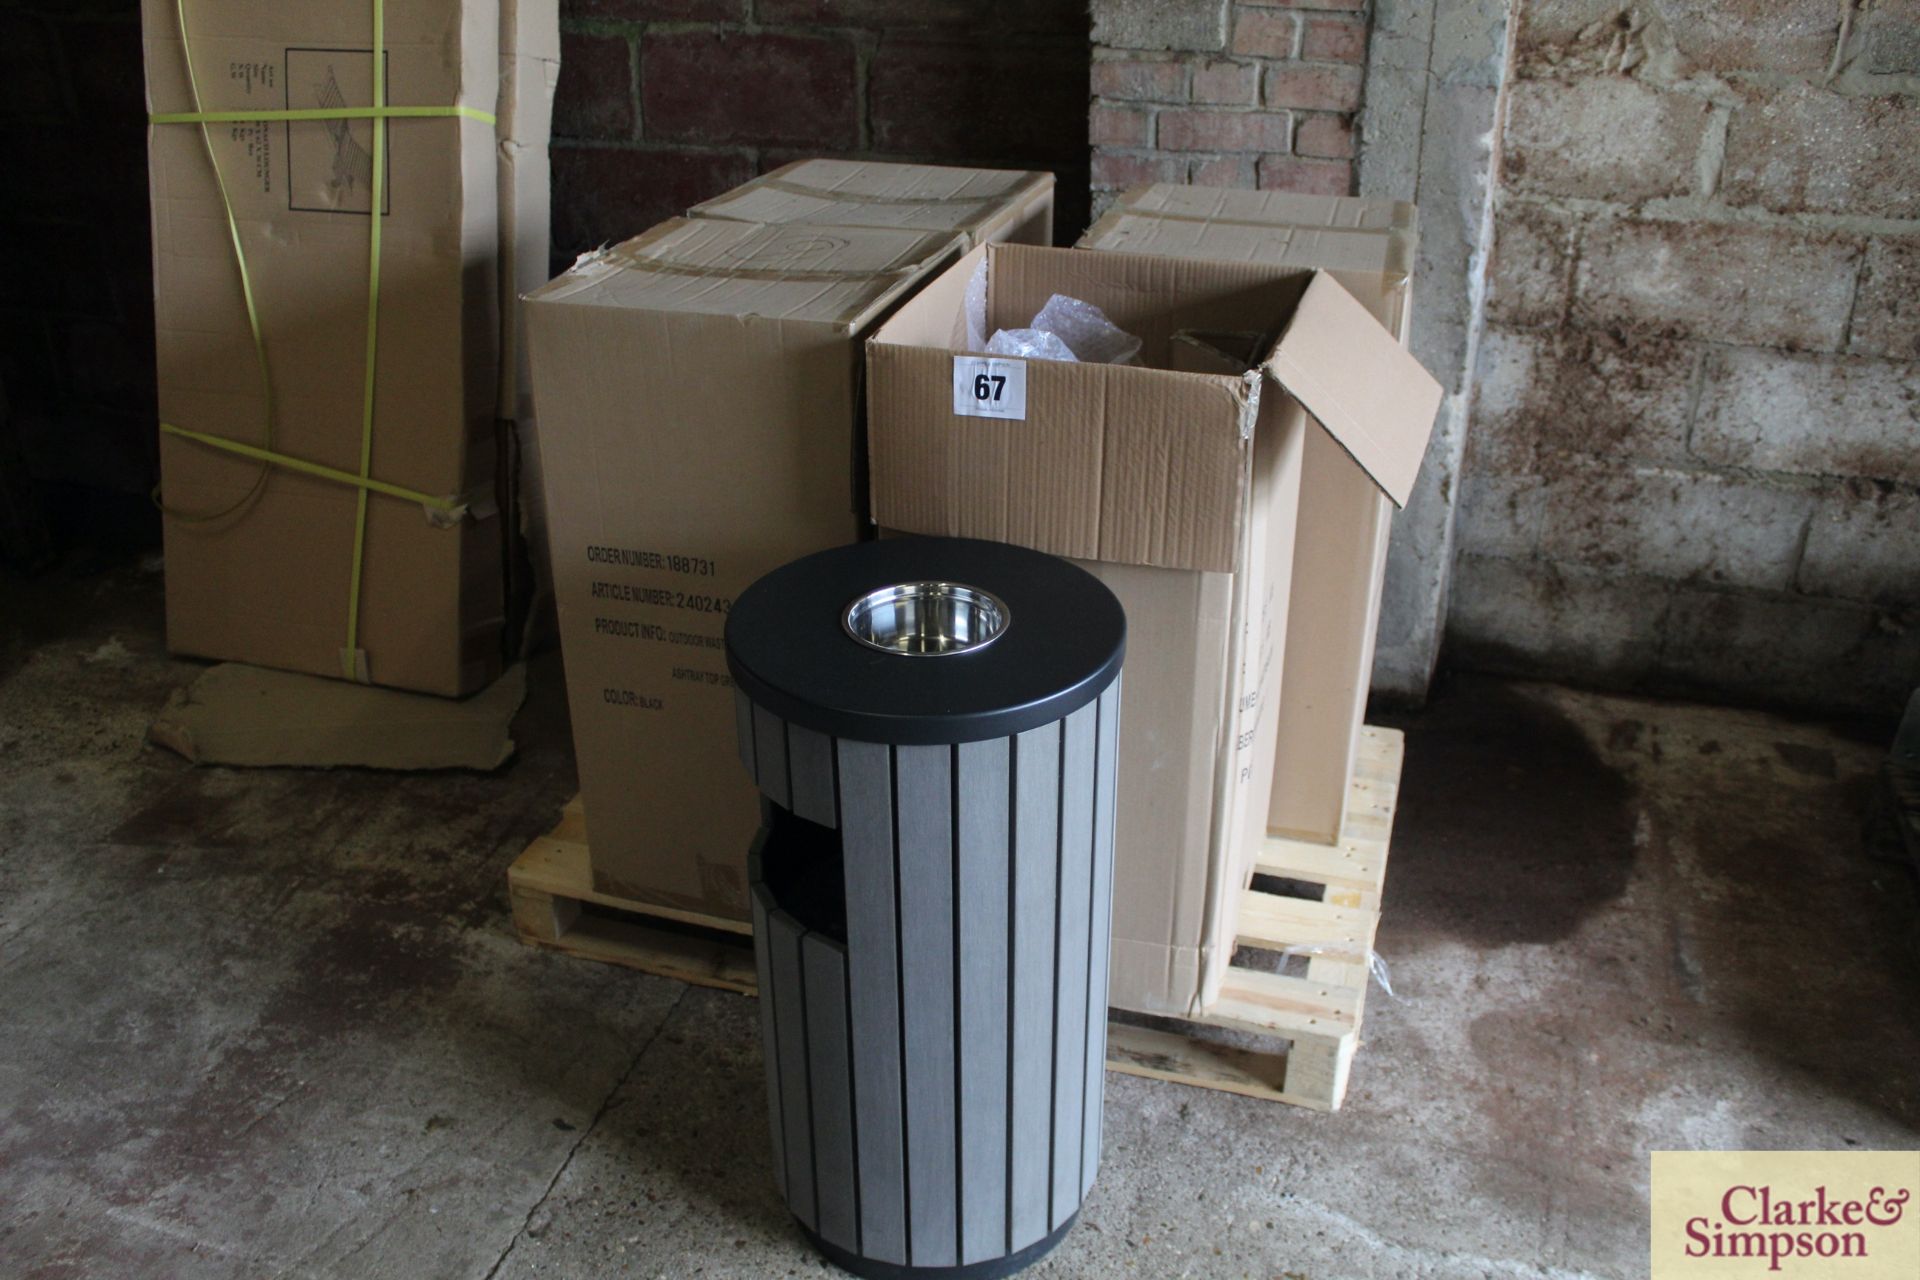 4x boxed outdoor waste bins with ash trays.